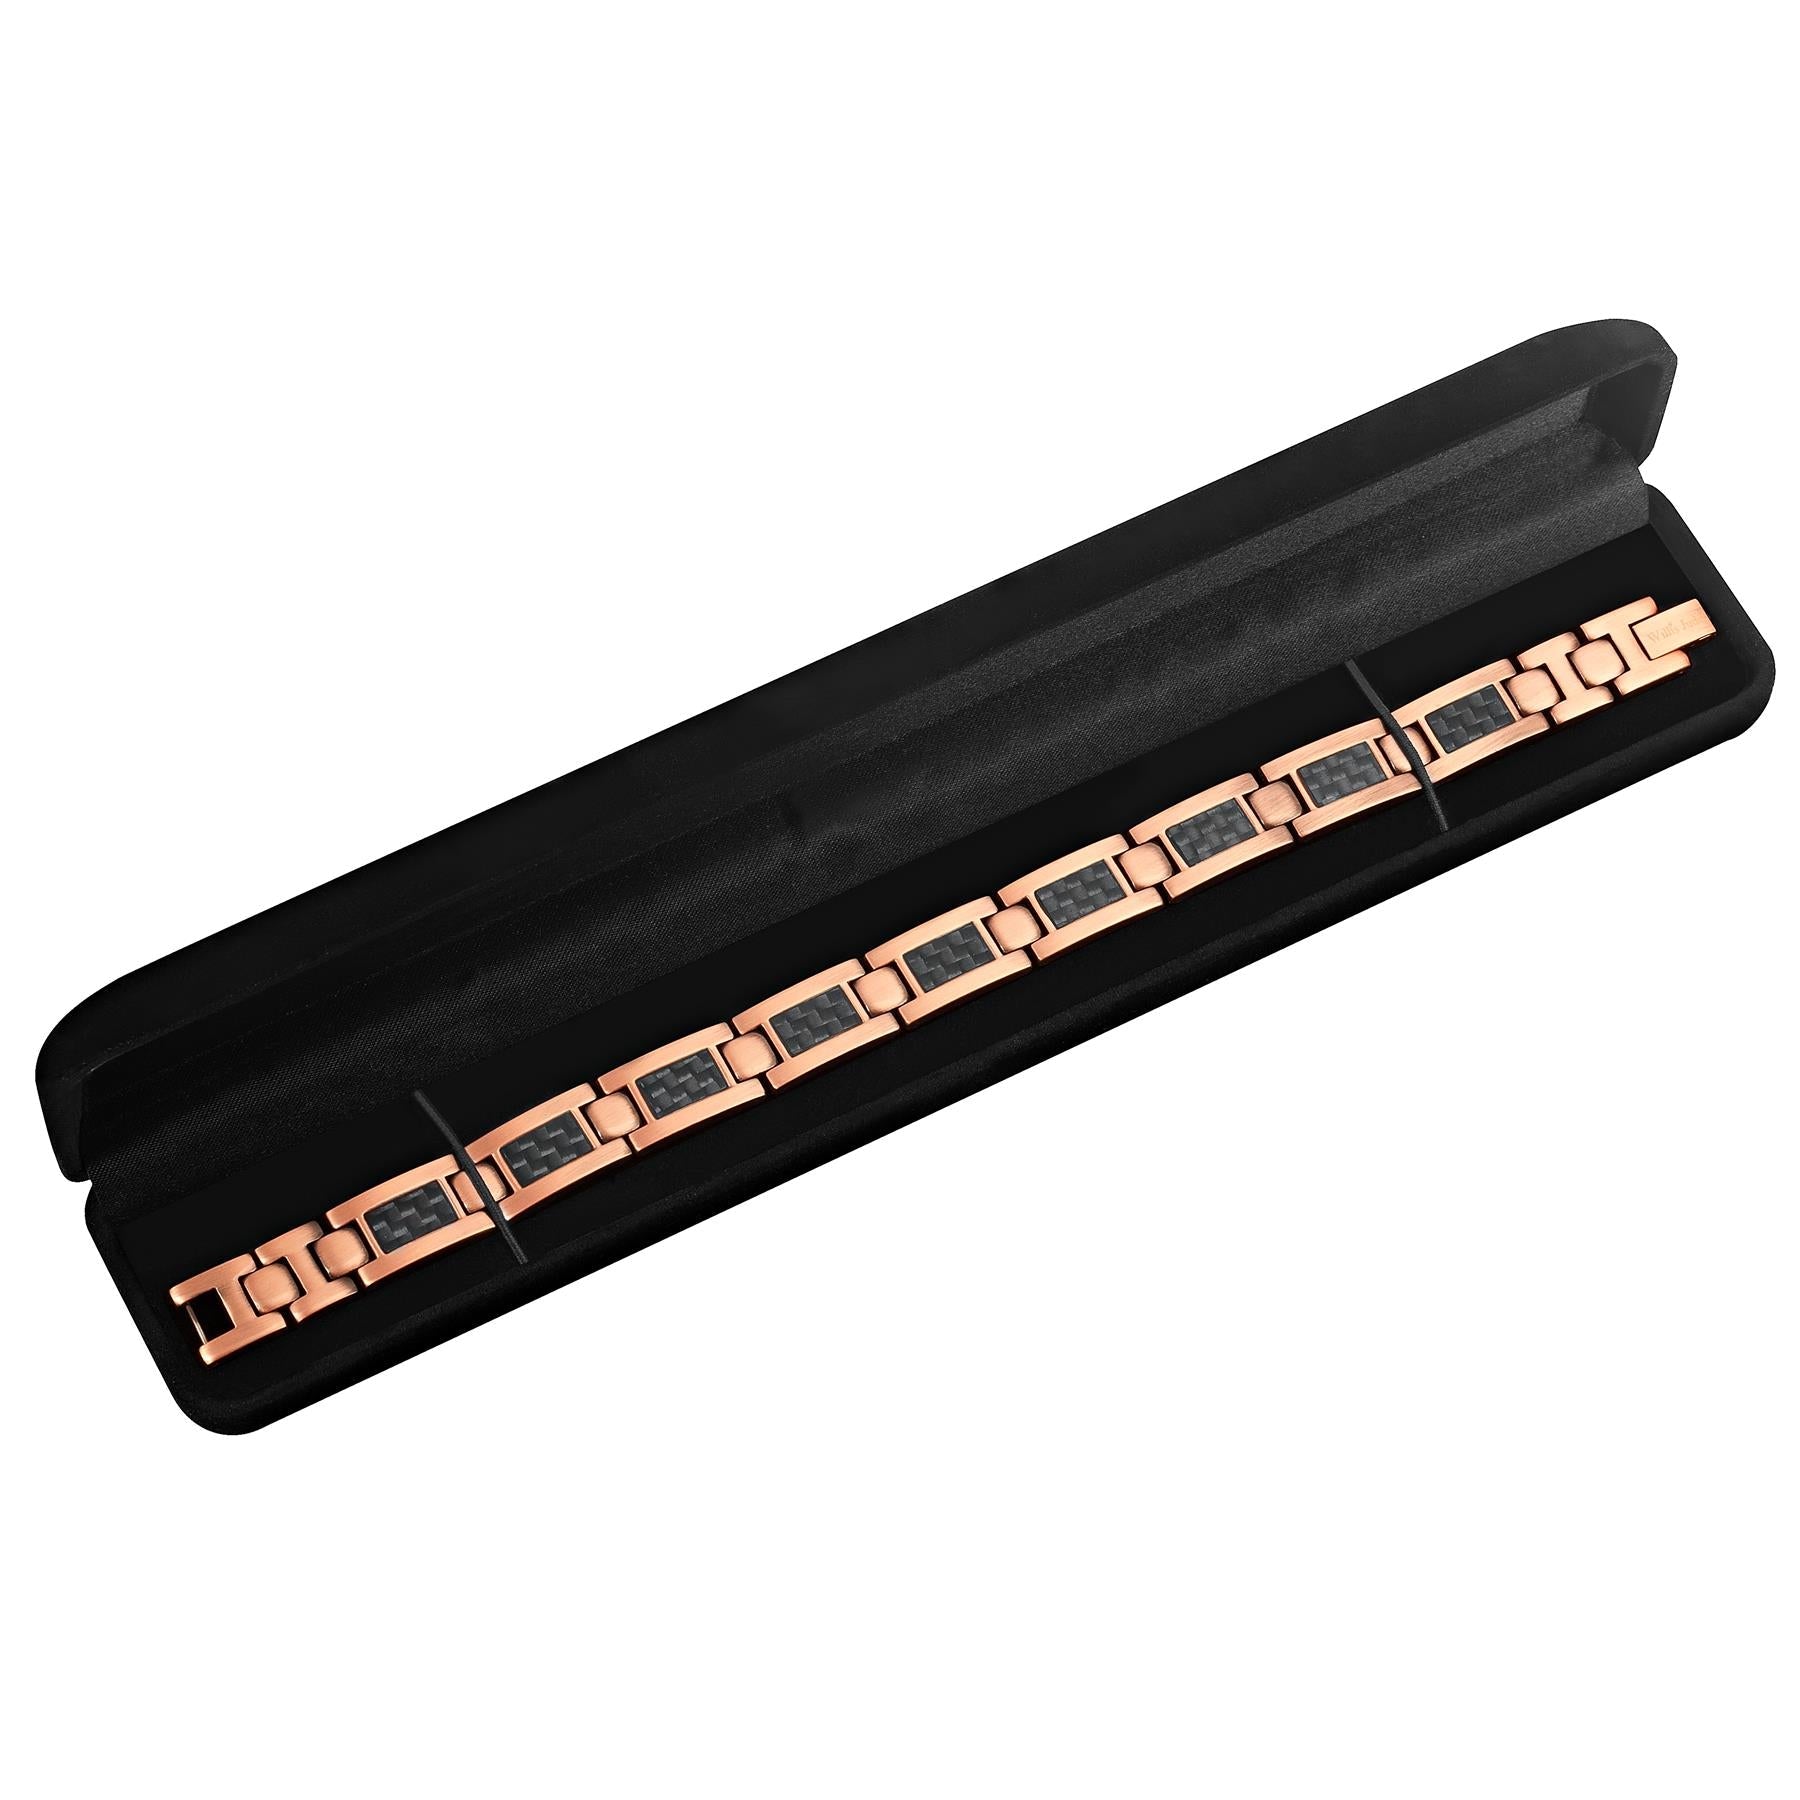 Mens Copper Magnetic Bracelet Double Row By Willis Judd